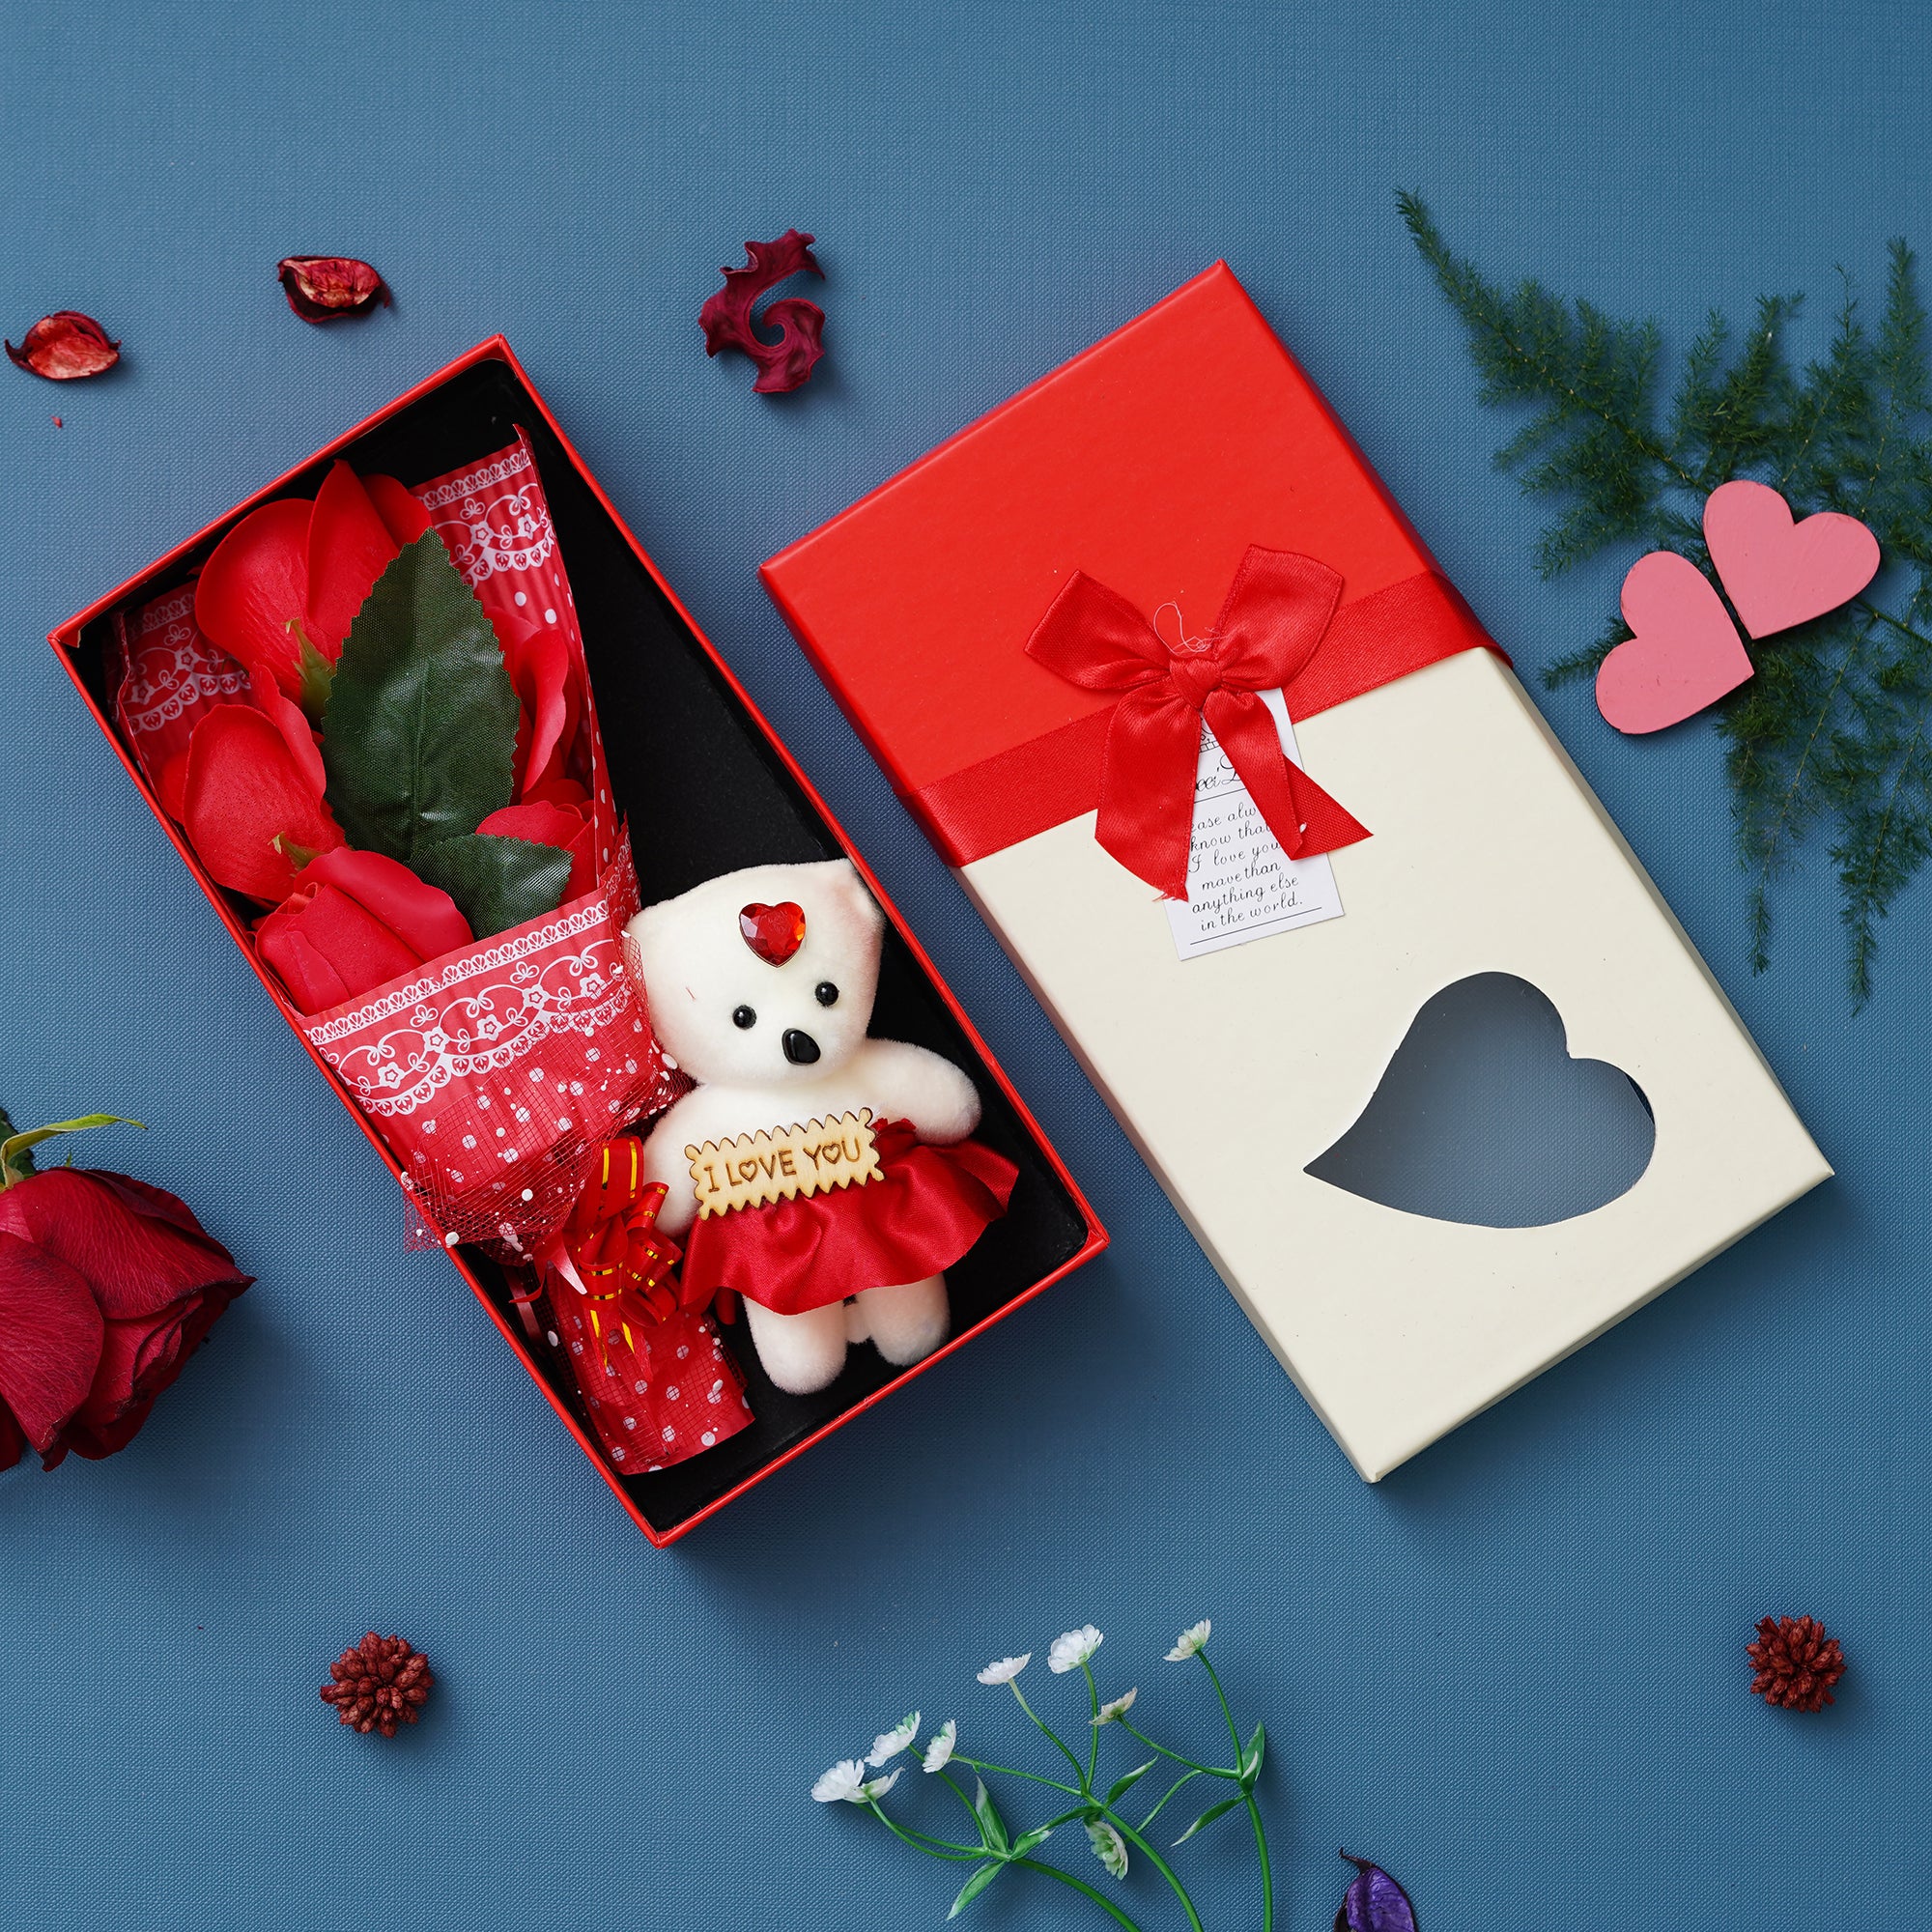 Valentine Combo of Pack of 12 Love Coupons Gift Cards Set, "20 Reasons Why I Love You" Printed on Little Red Hearts Decorative Wooden Gift Set Box, Red Roses Bouquet and White, Red Teddy Bear Valentine's Rectangle Shaped Gift Box 5